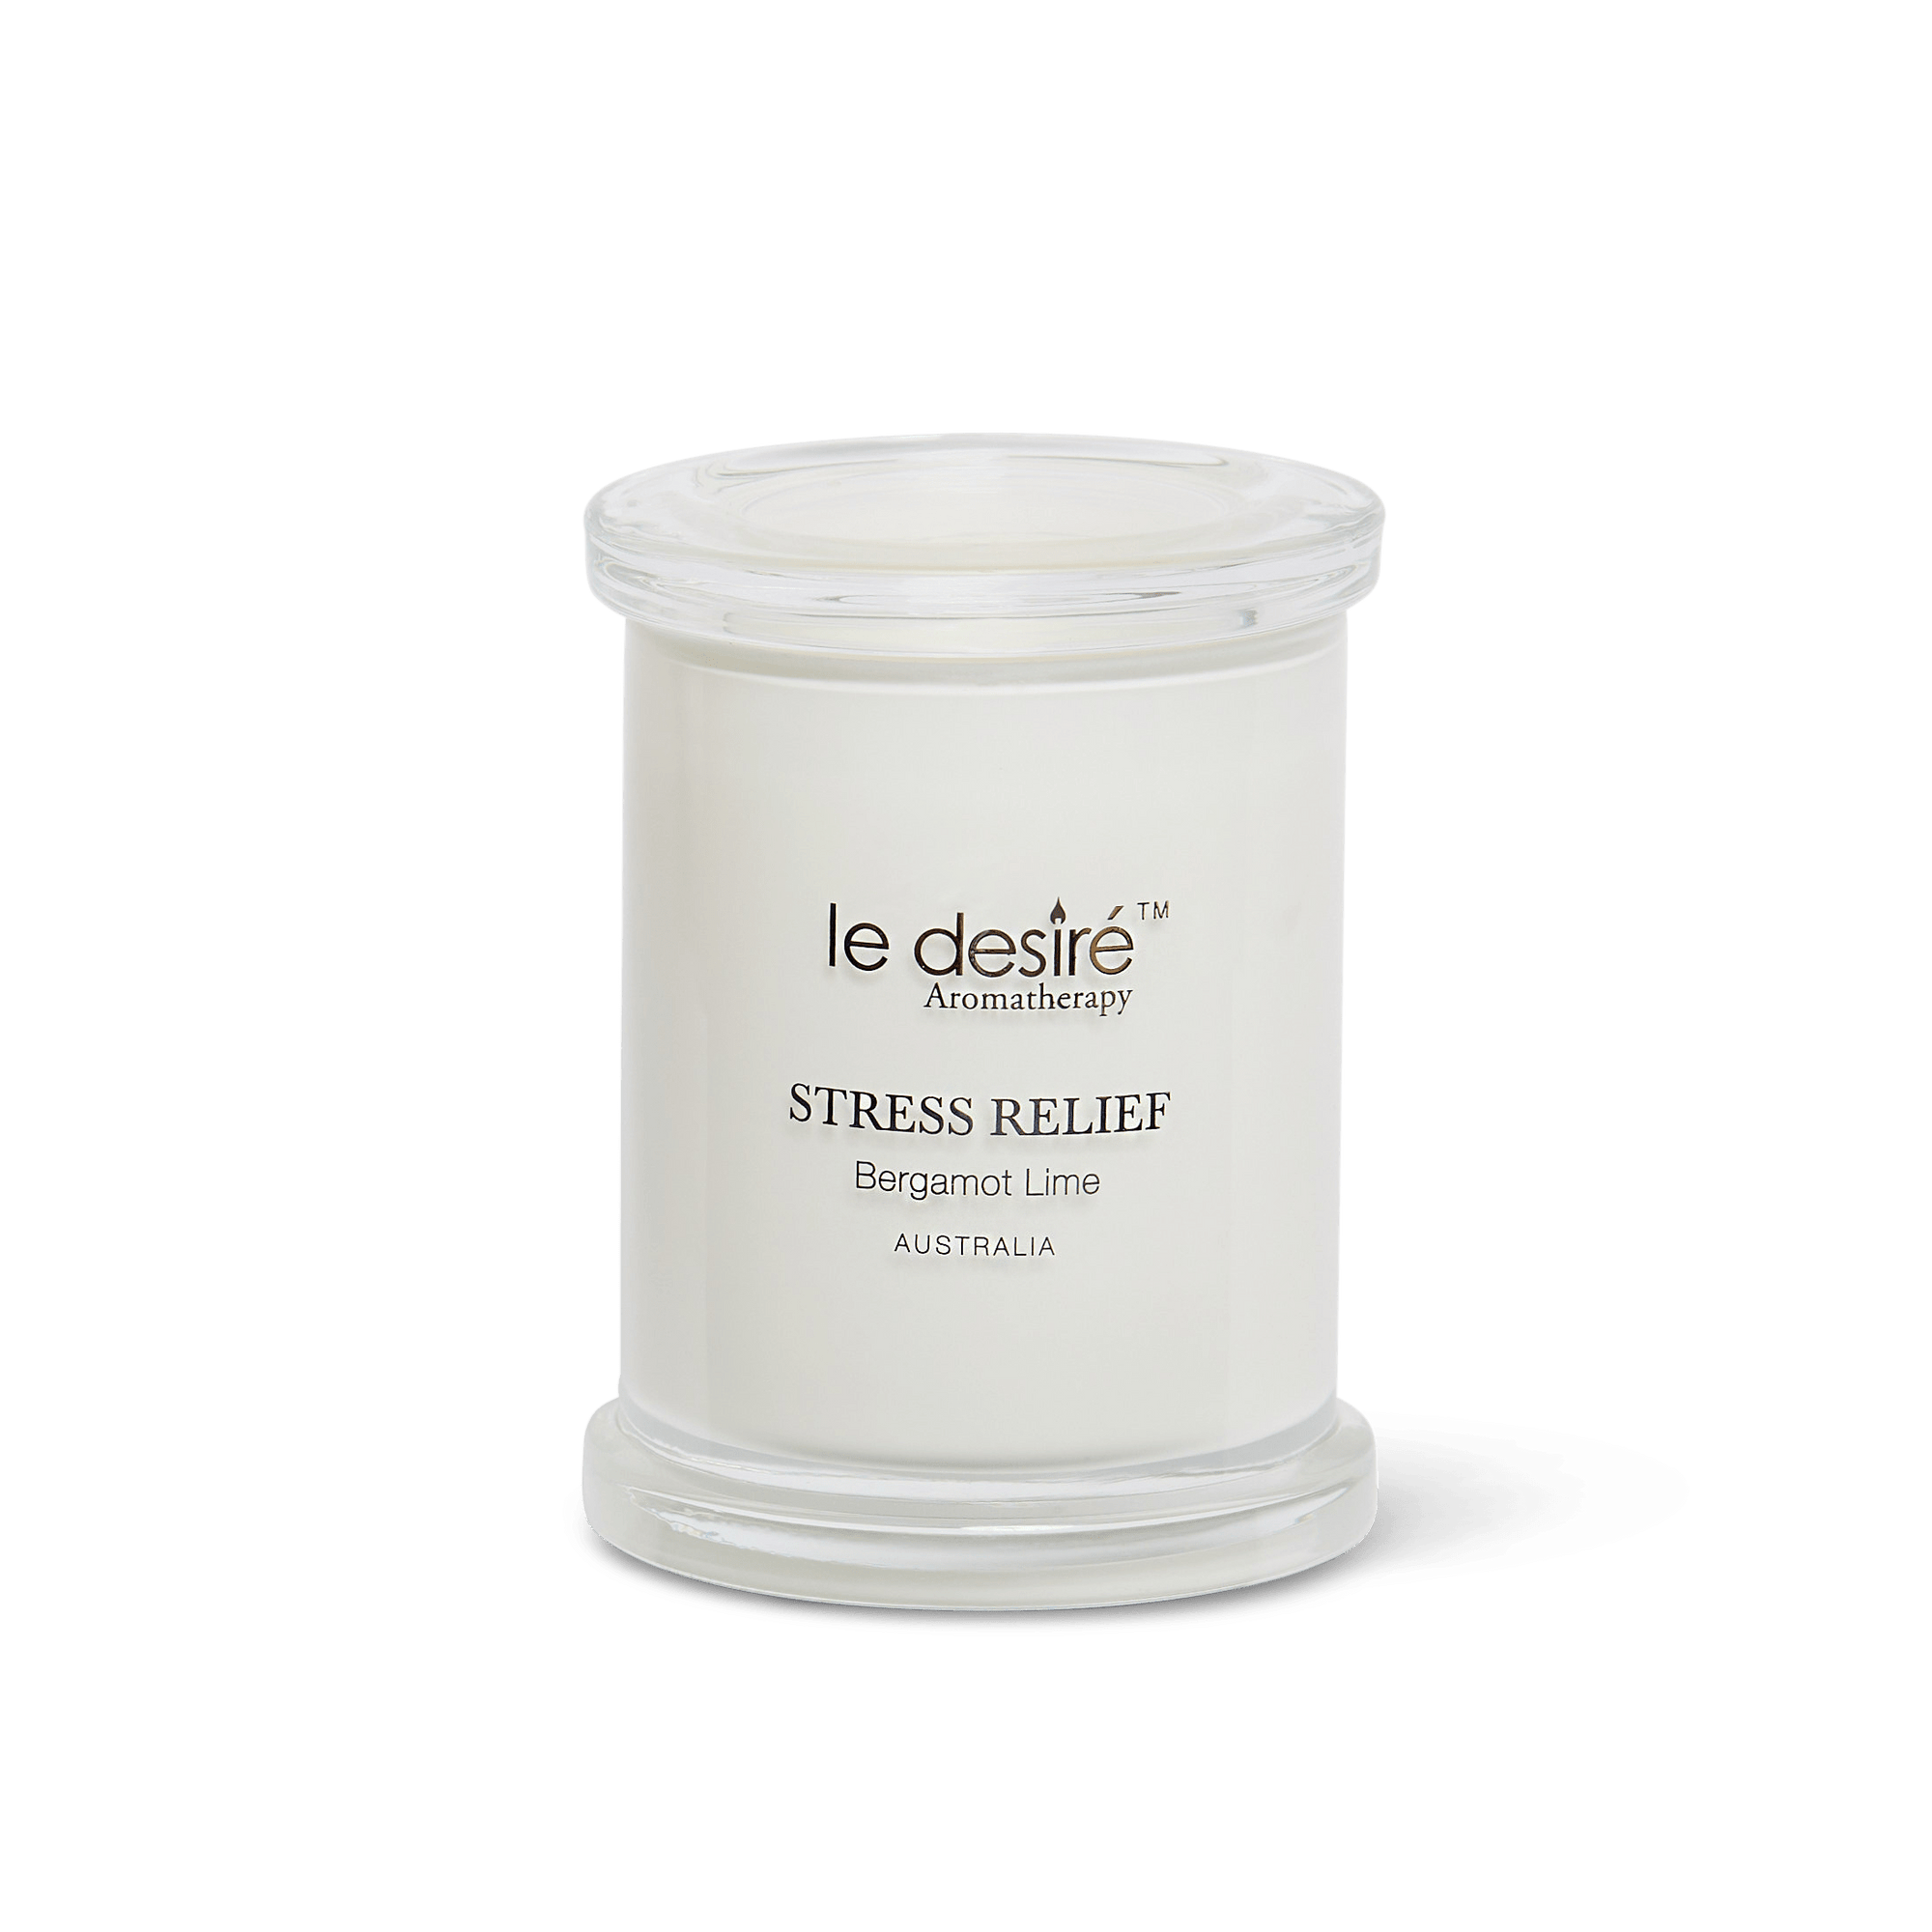 Stress Relief (Bergamot Lime) - Aromatherapy Soy Candle